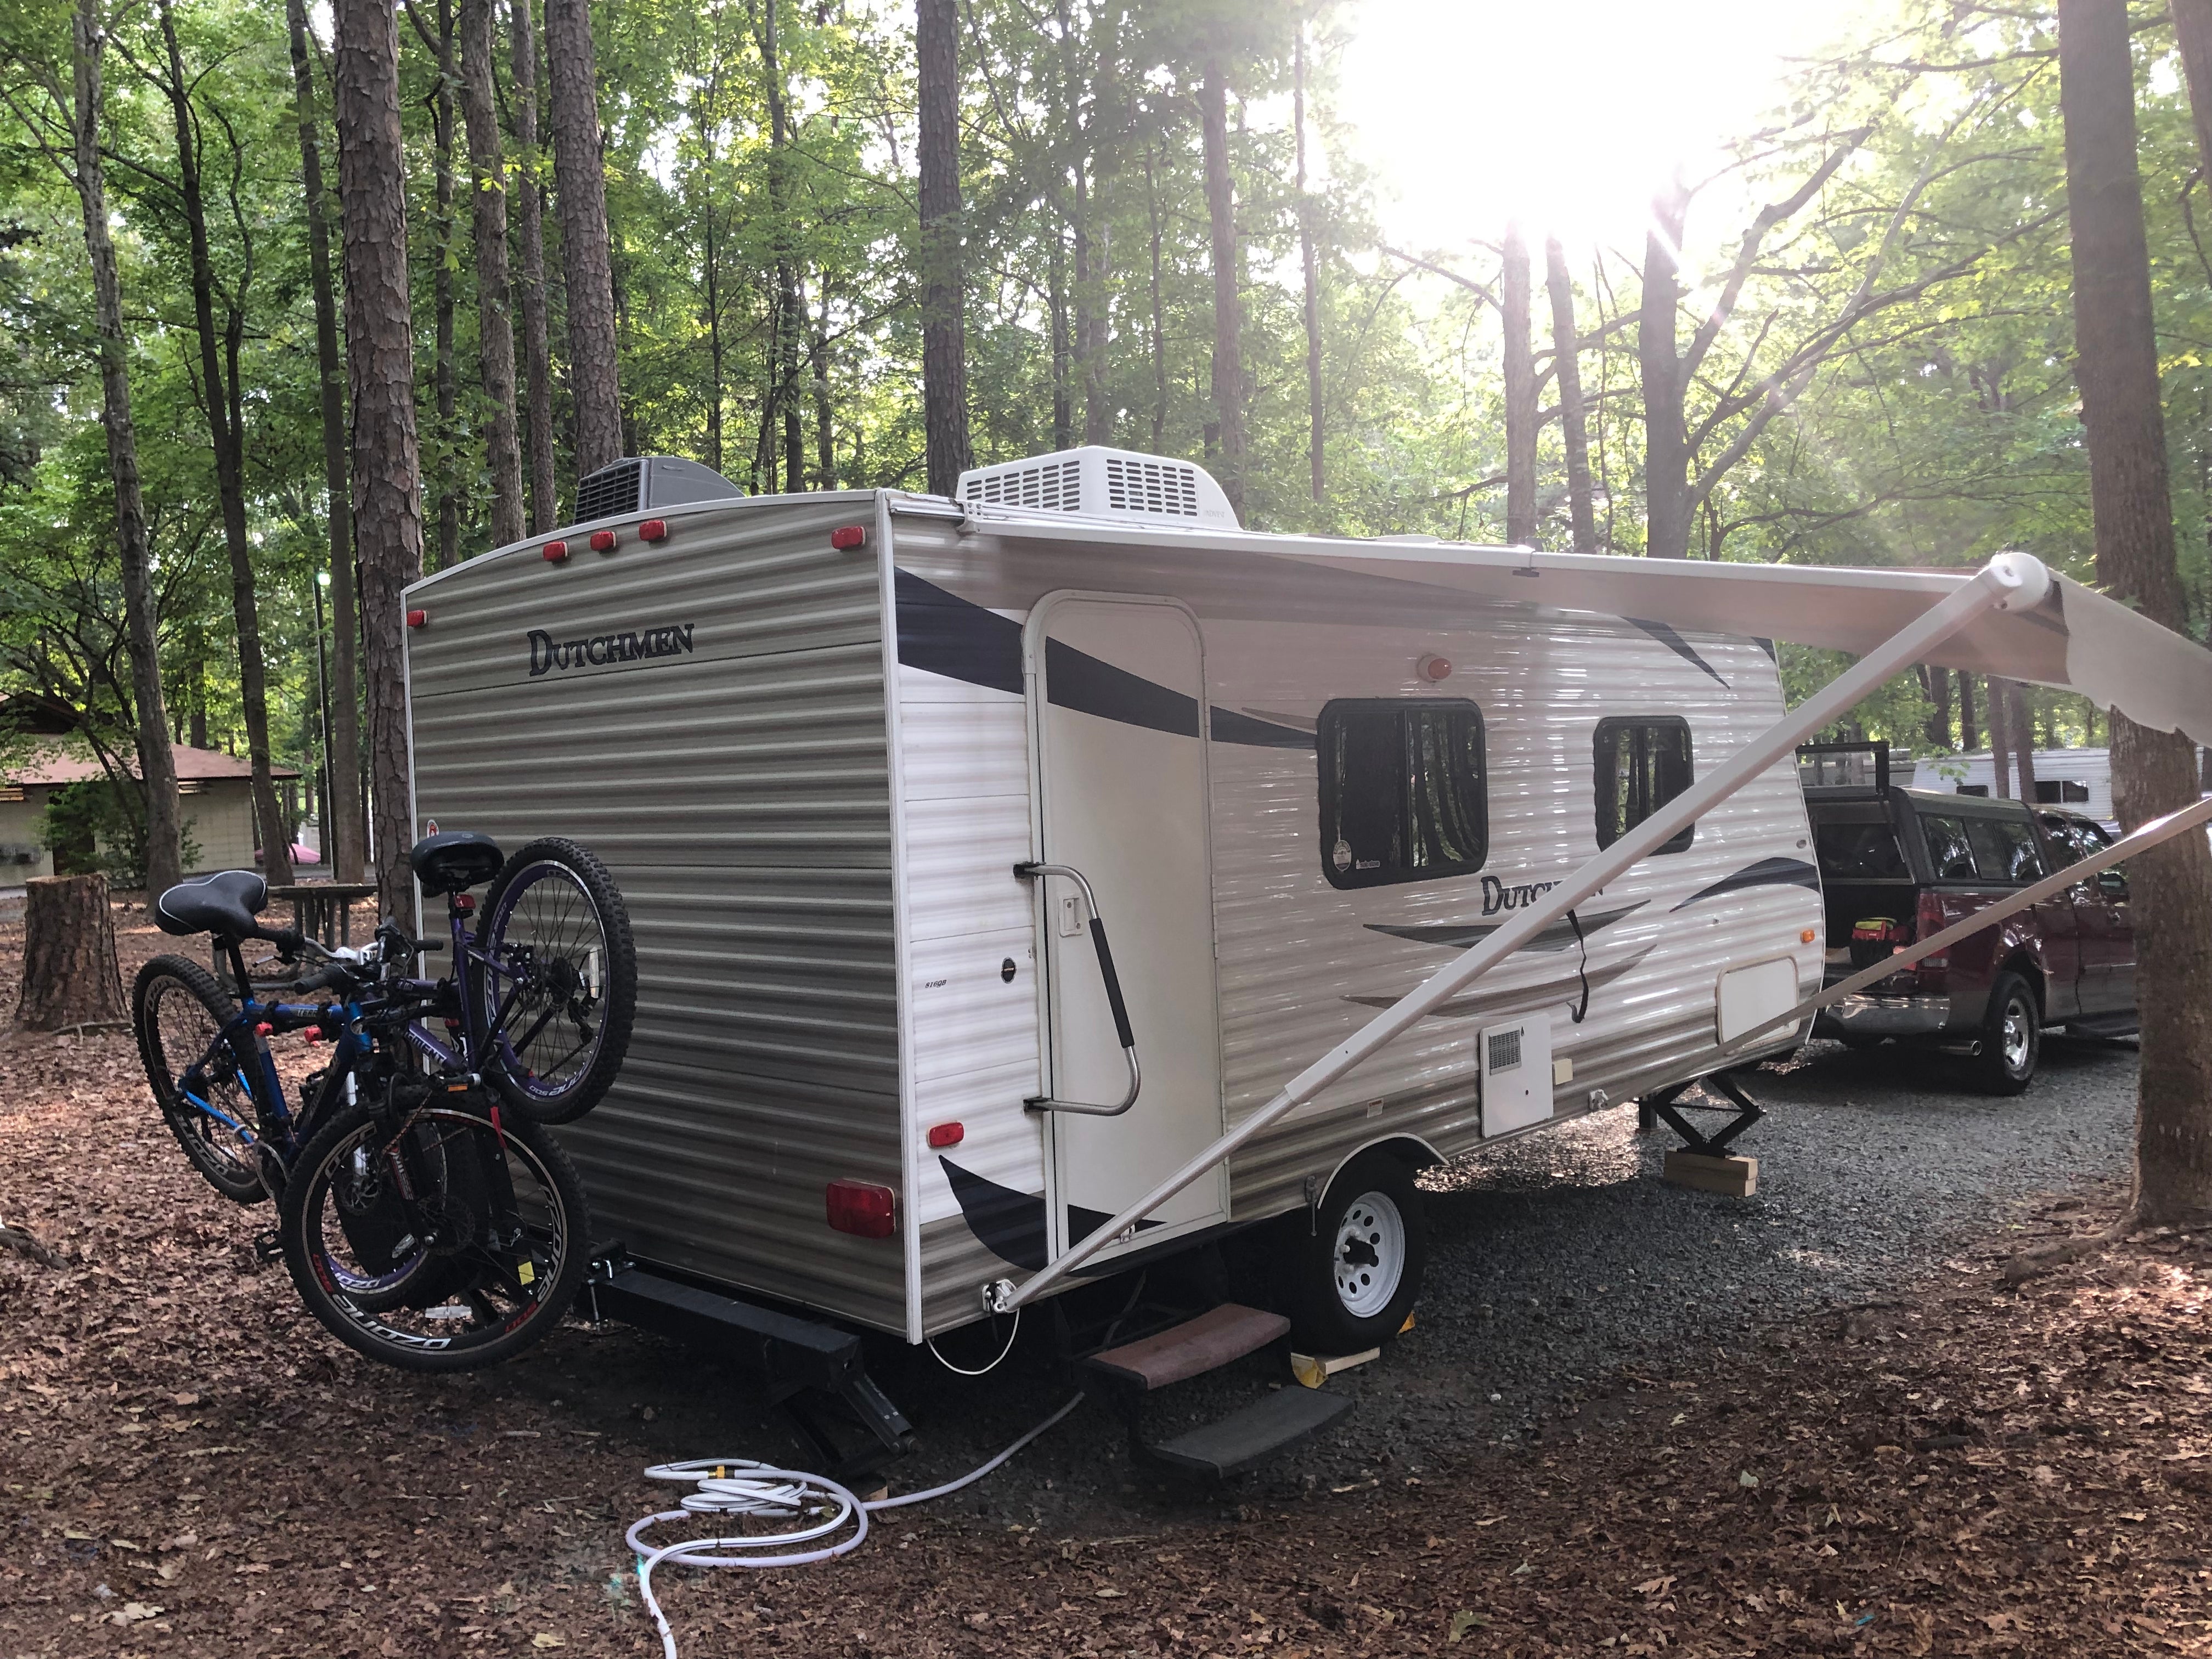 Maiden voyage in our new rv at Cane Creek Campground in Waxhaw NC